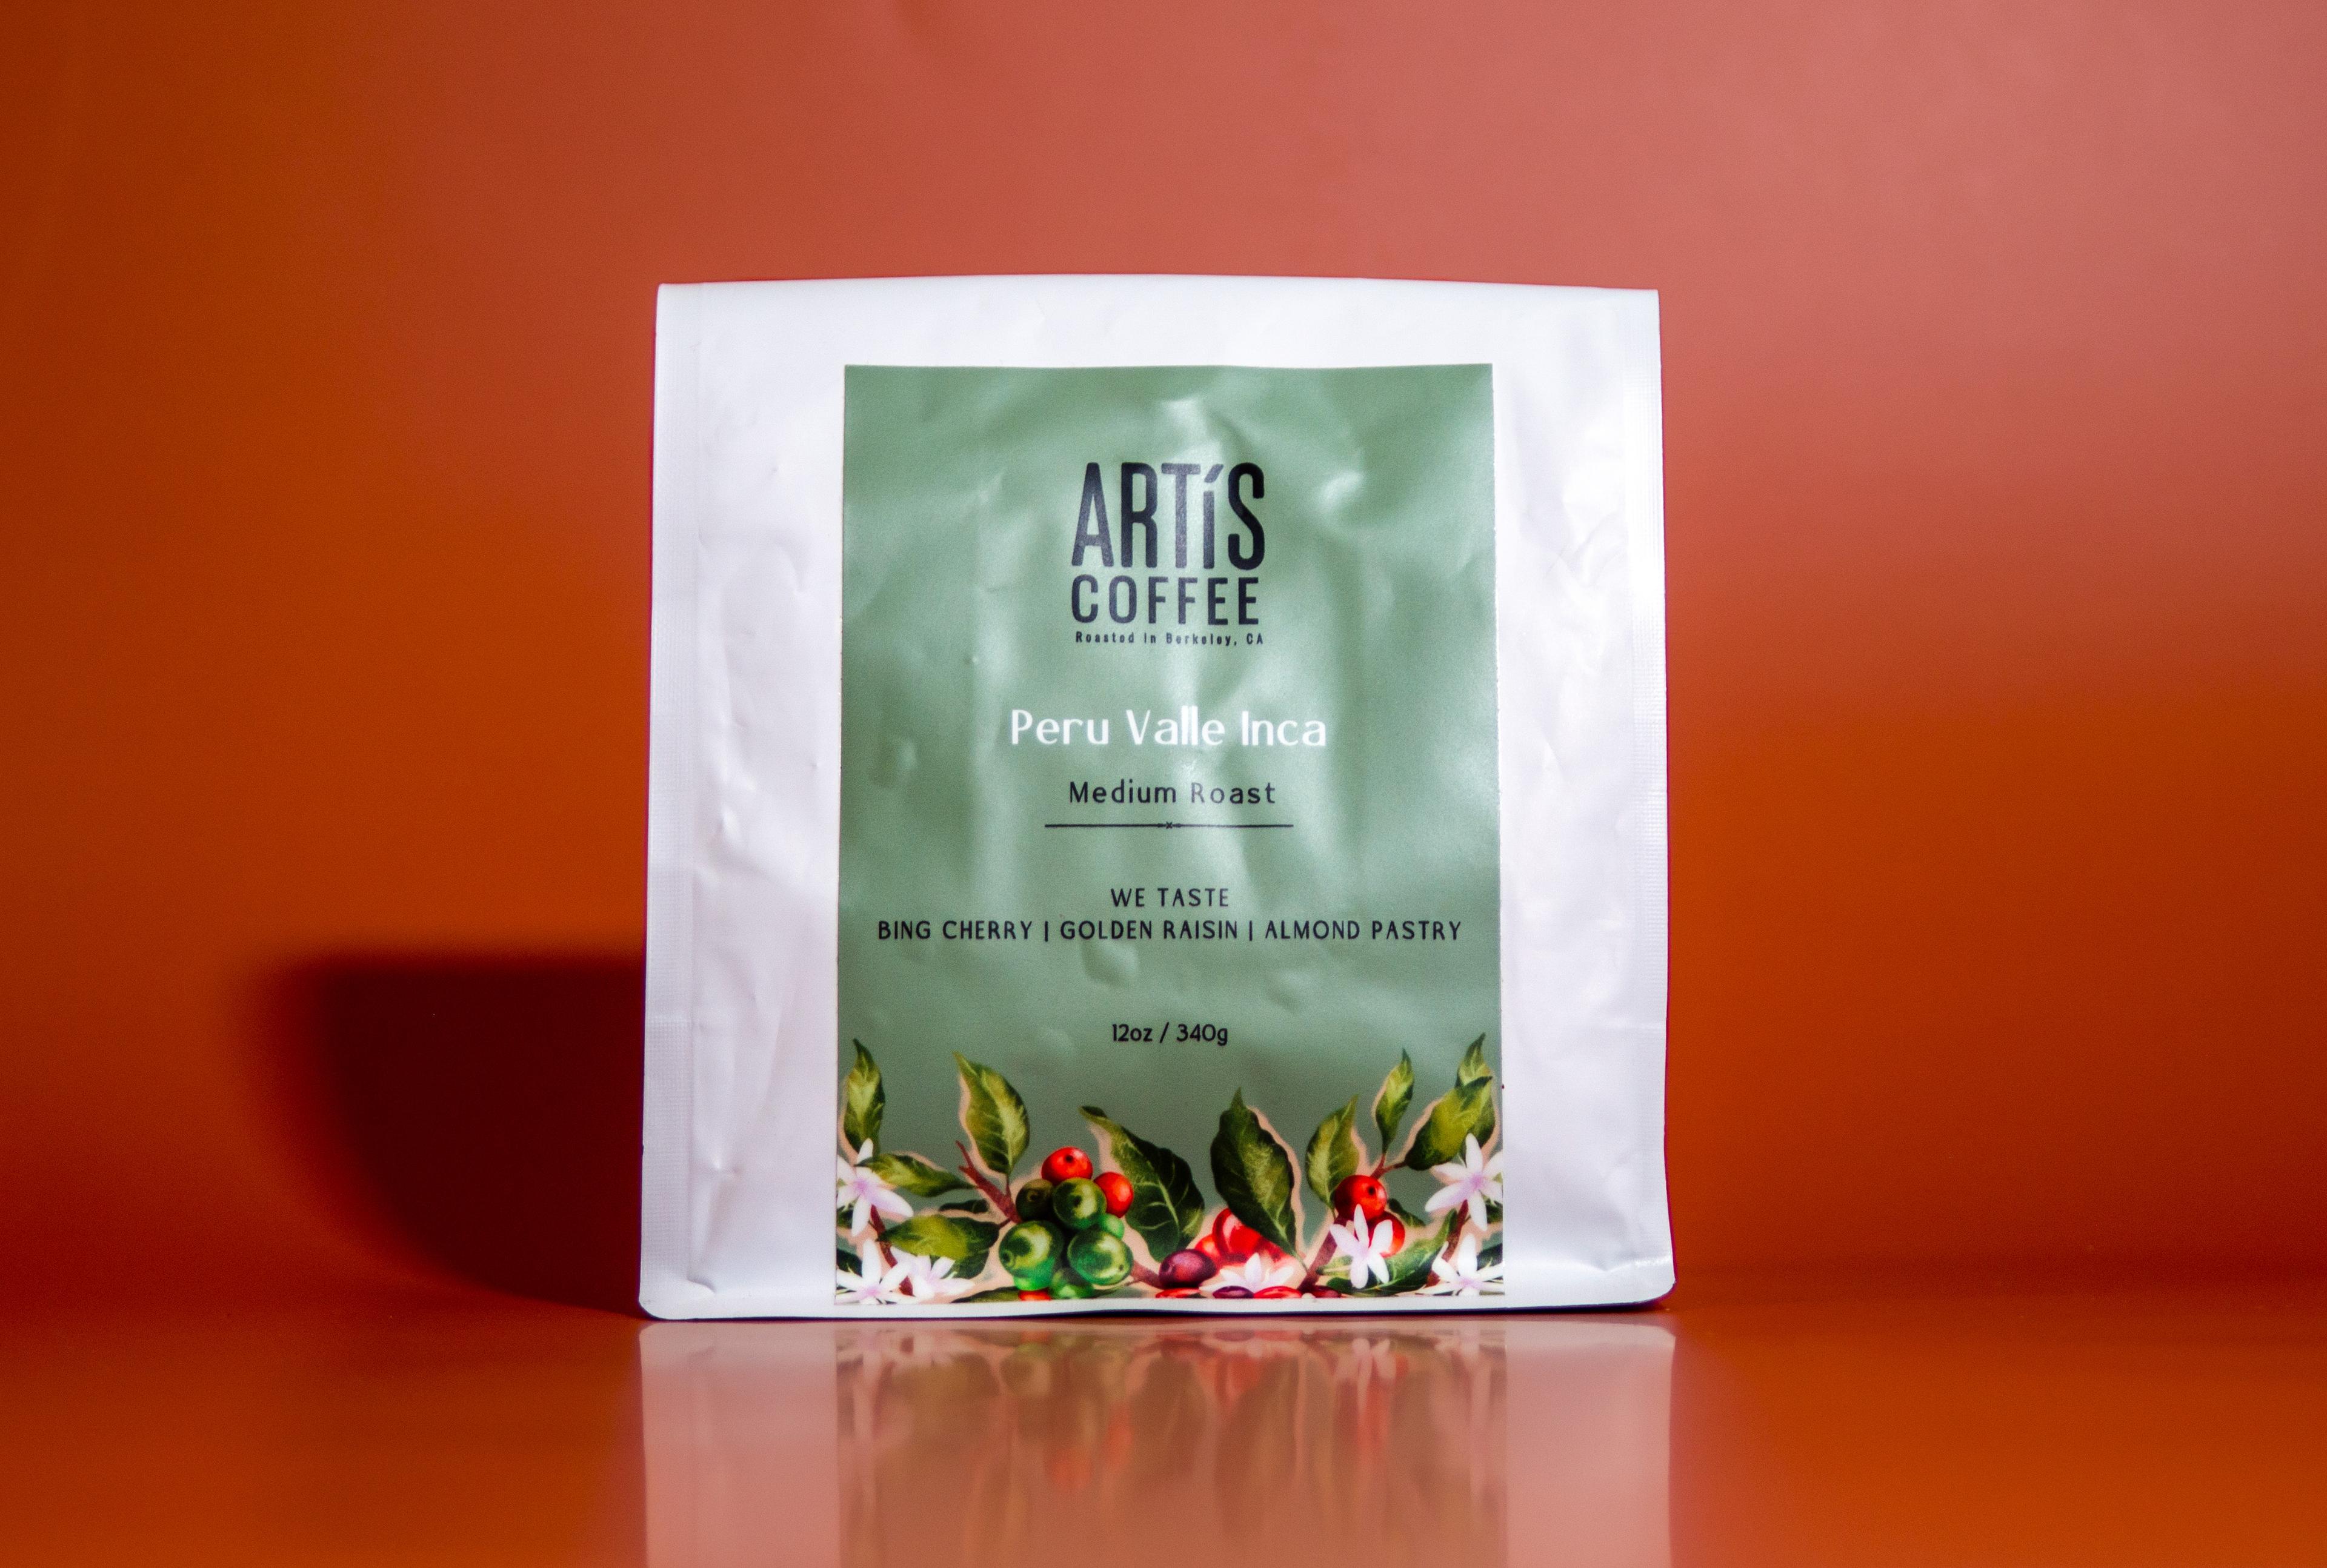 Peru Valle Inca beans from Artís Coffee on a fruity green background